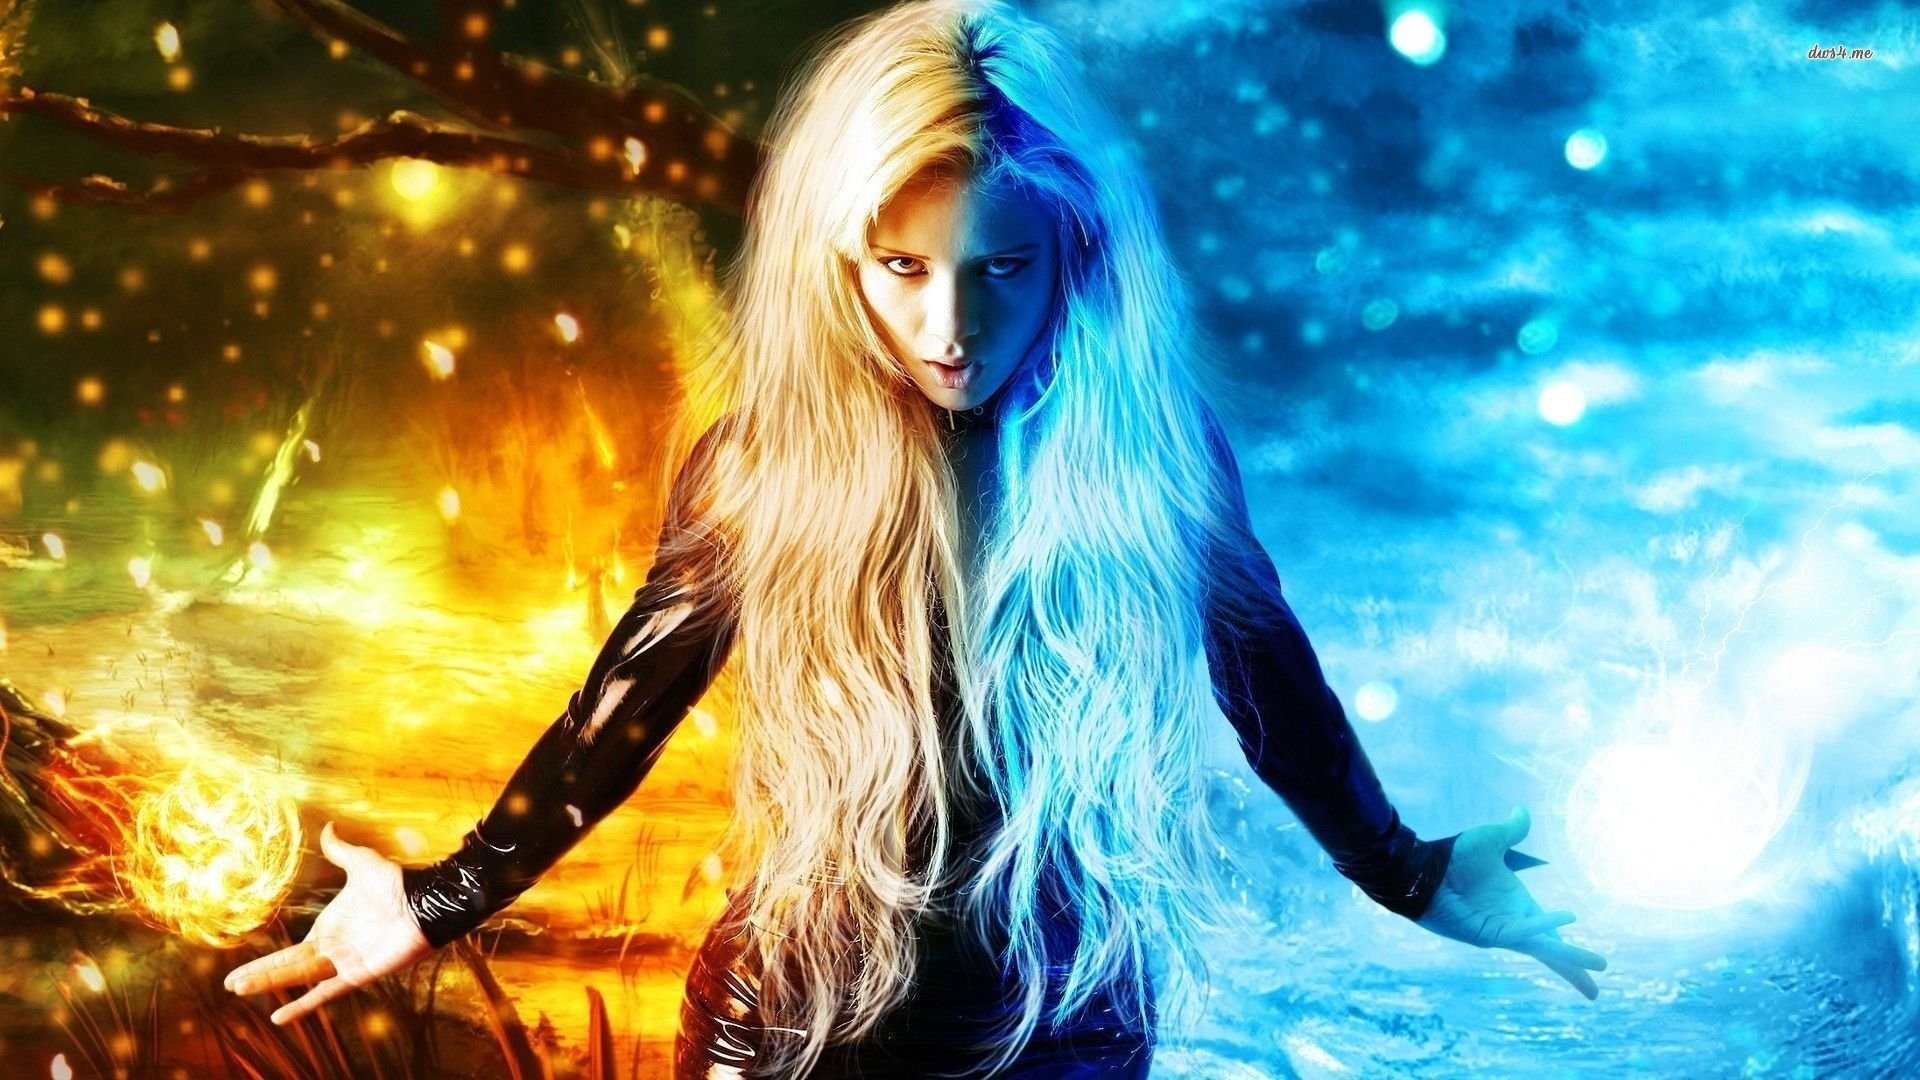 1920x1080 ... woman out of fire and ice walldevil; fire and ice wallpaper ...